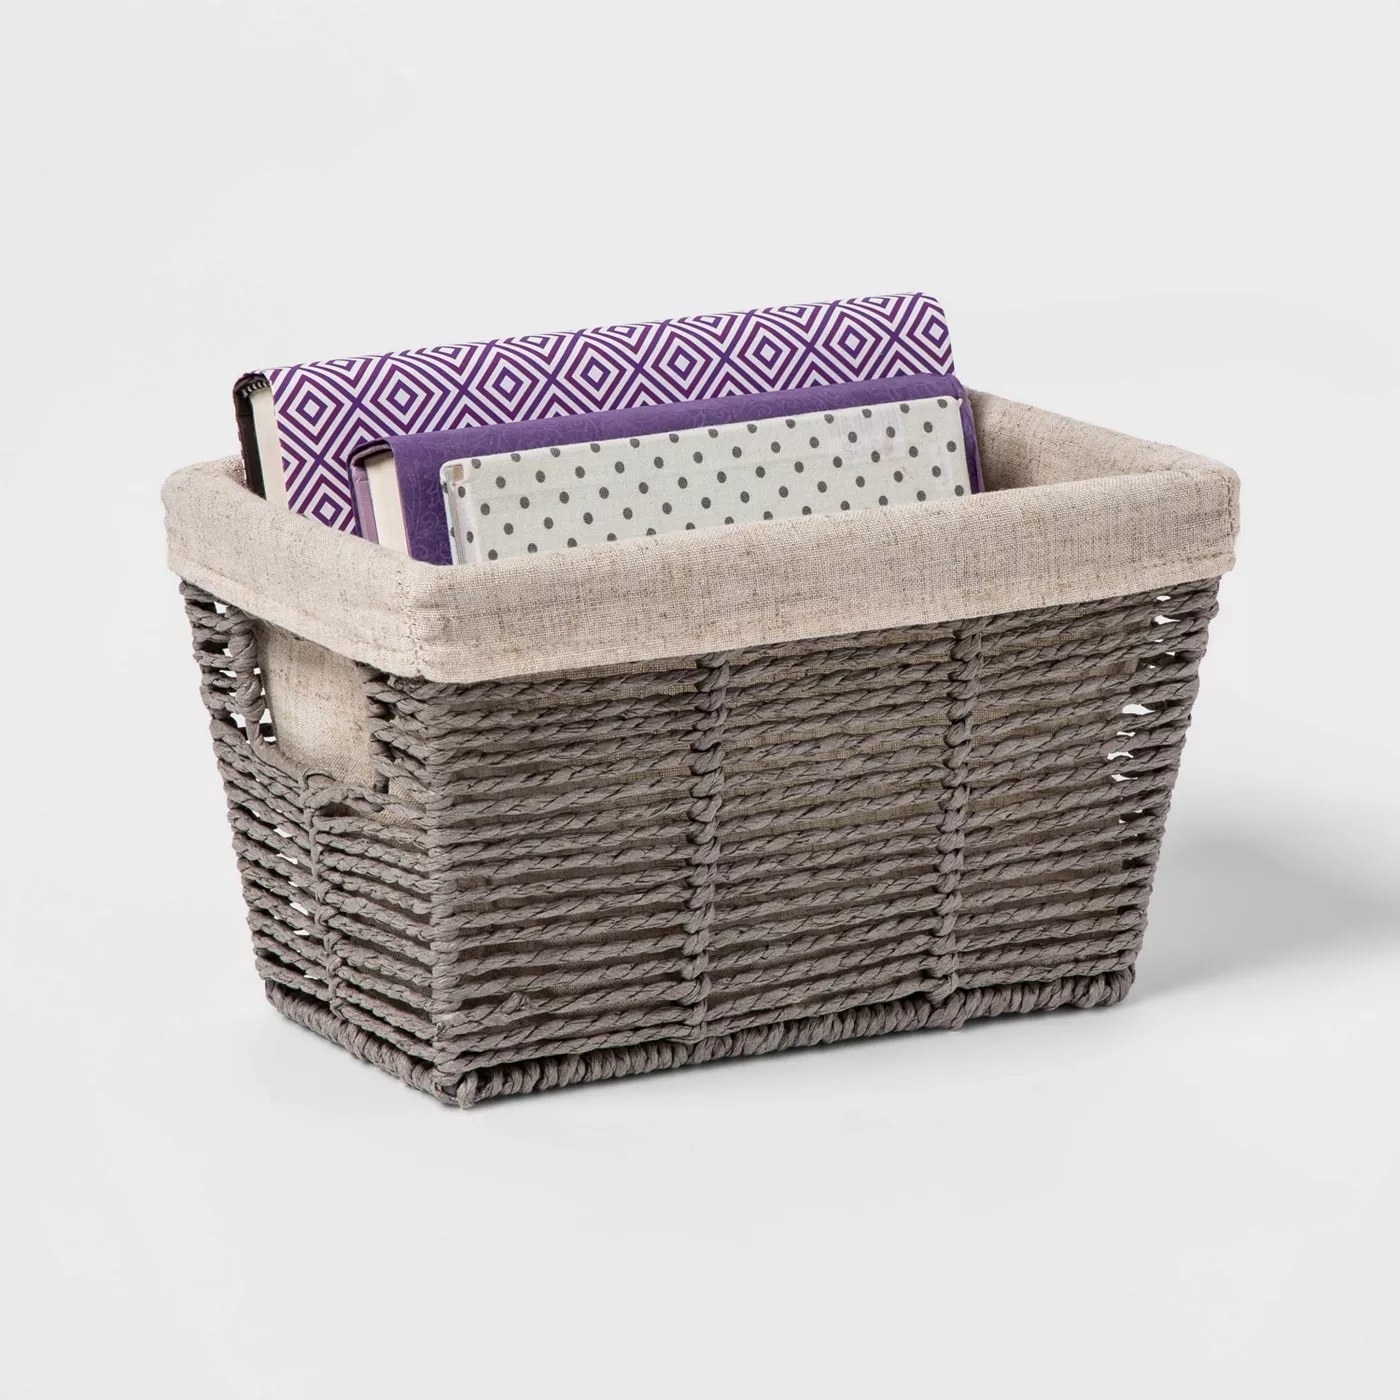 A roped basket